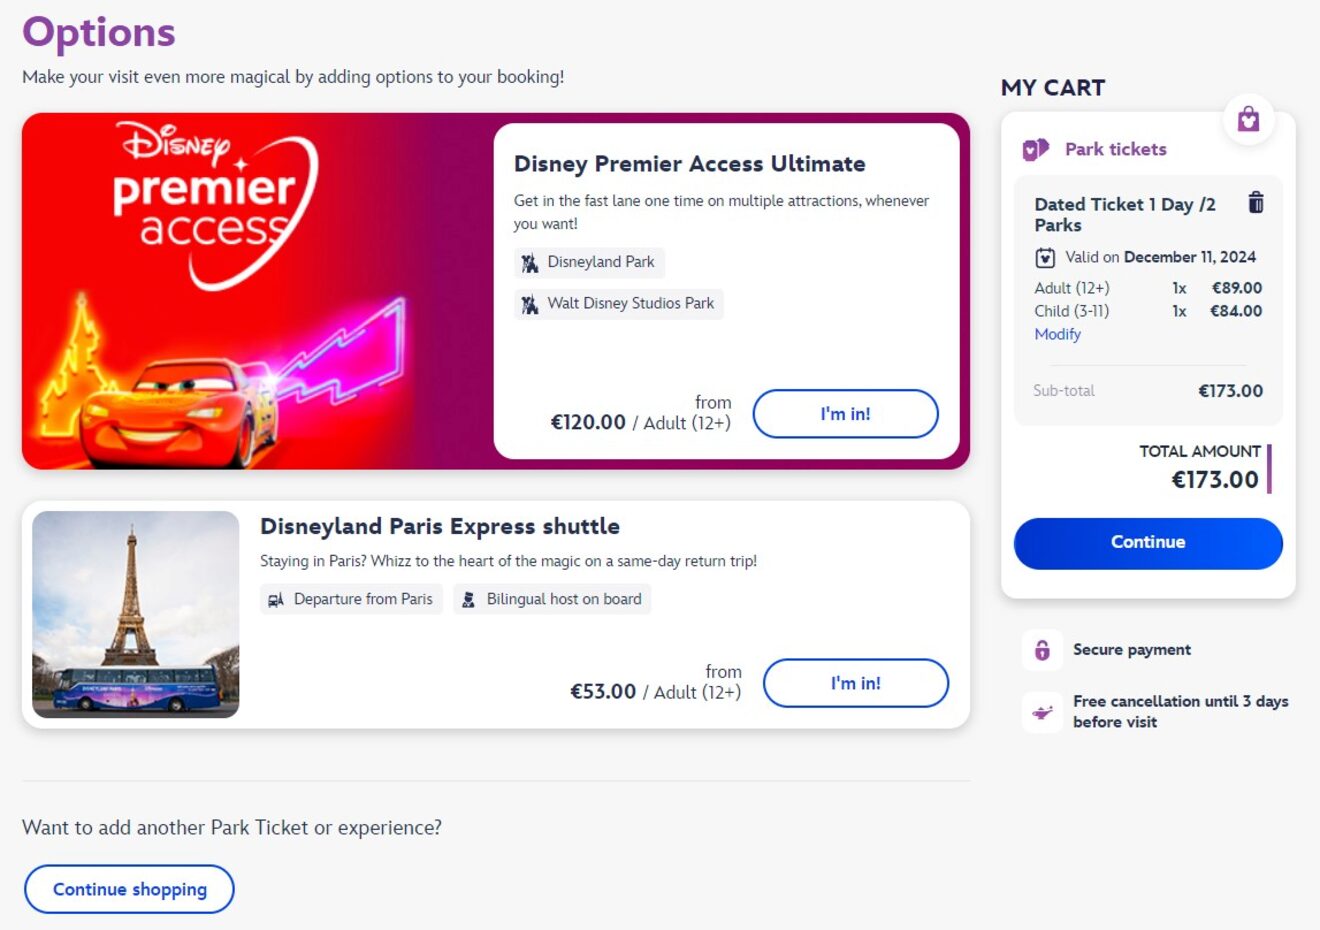 Disneyland Paris booking page showing options for Disney Premier Access Ultimate and Disneyland Paris Express shuttle